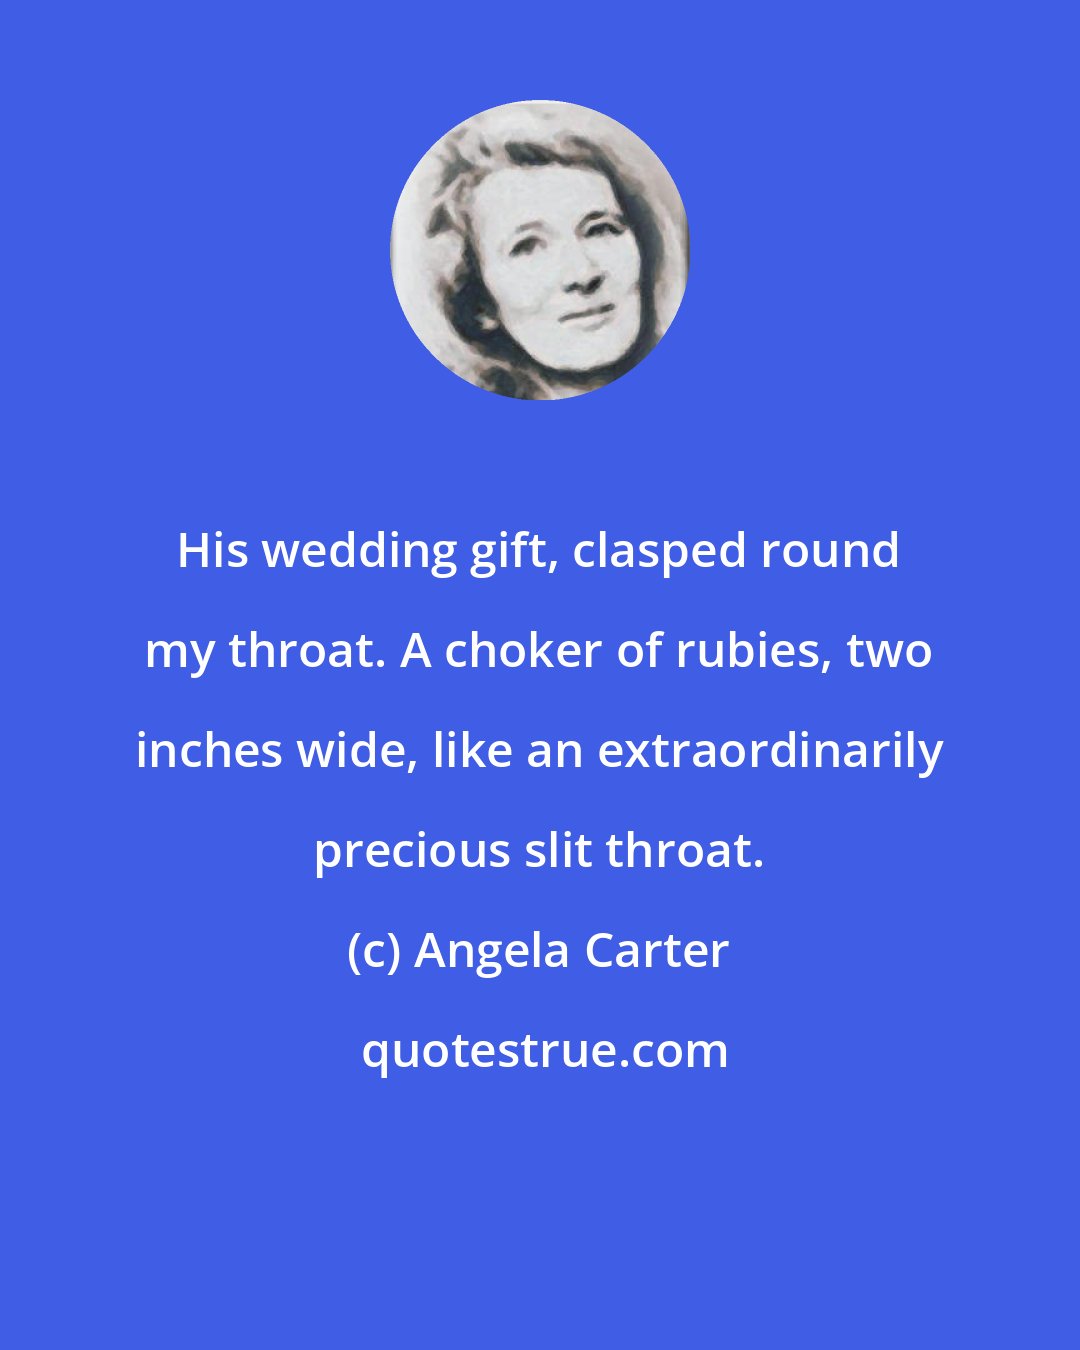 Angela Carter: His wedding gift, clasped round my throat. A choker of rubies, two inches wide, like an extraordinarily precious slit throat.